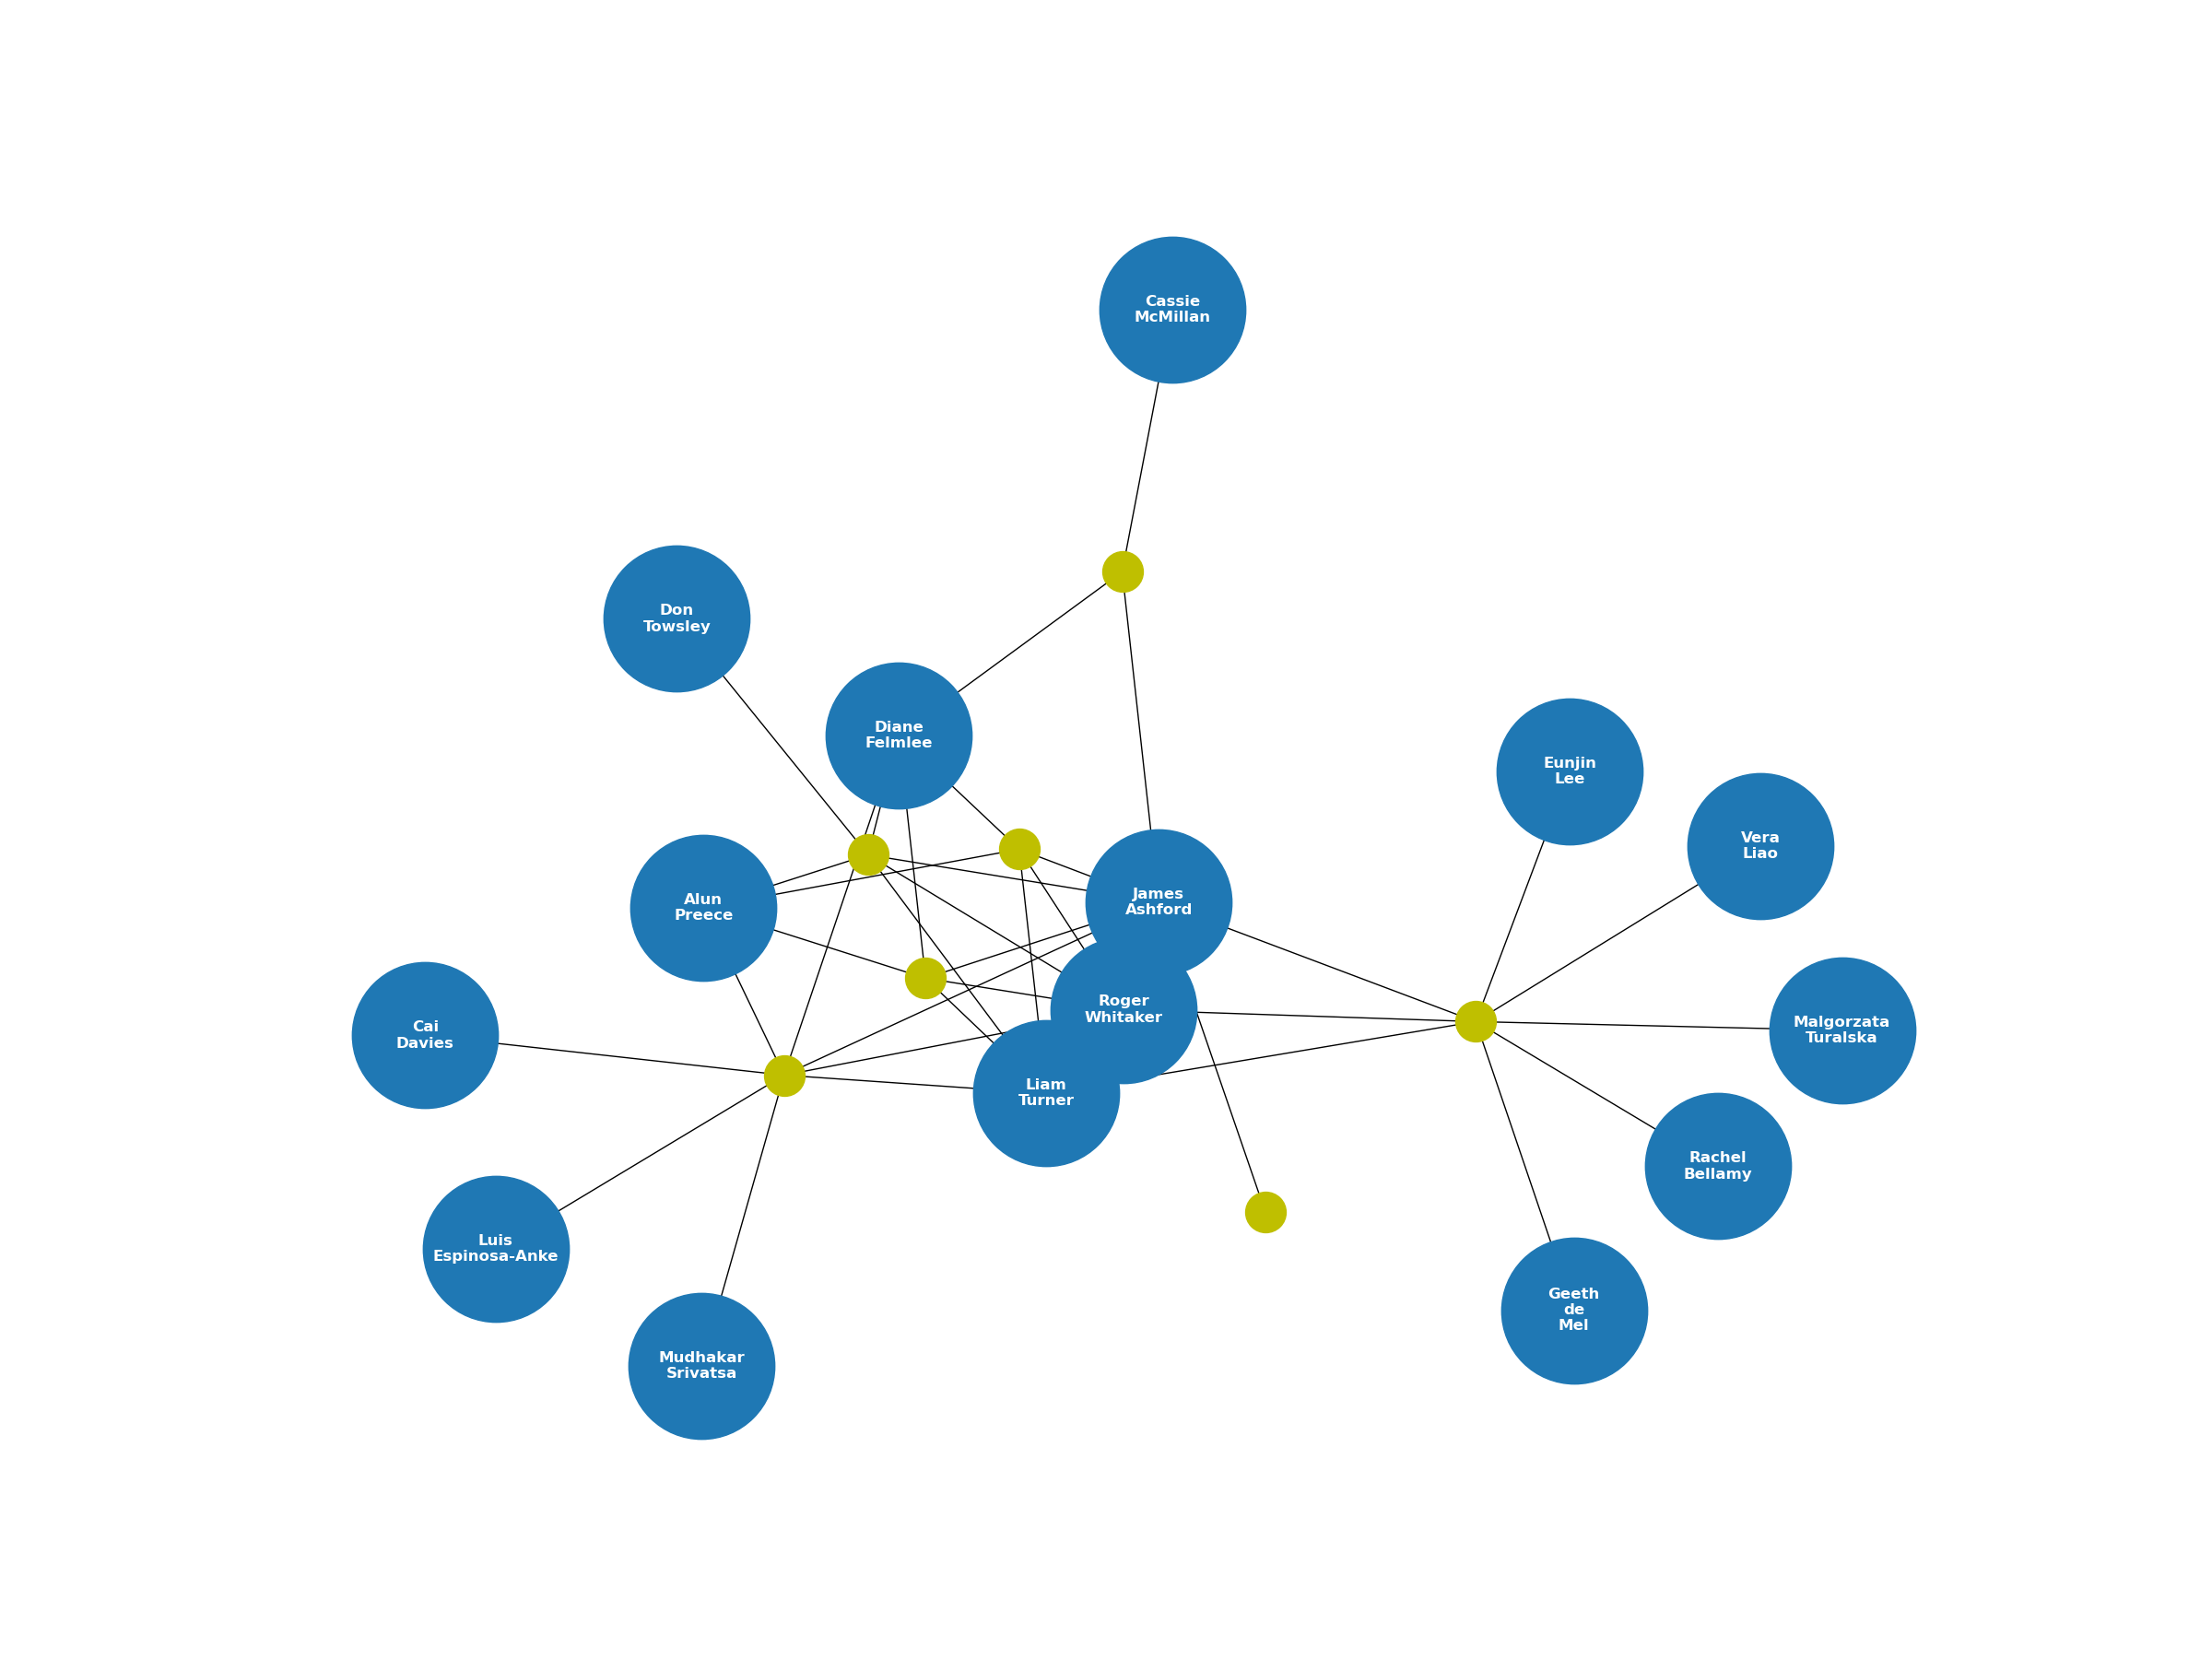 Visualising Paper Co-Author Collaboration Networks